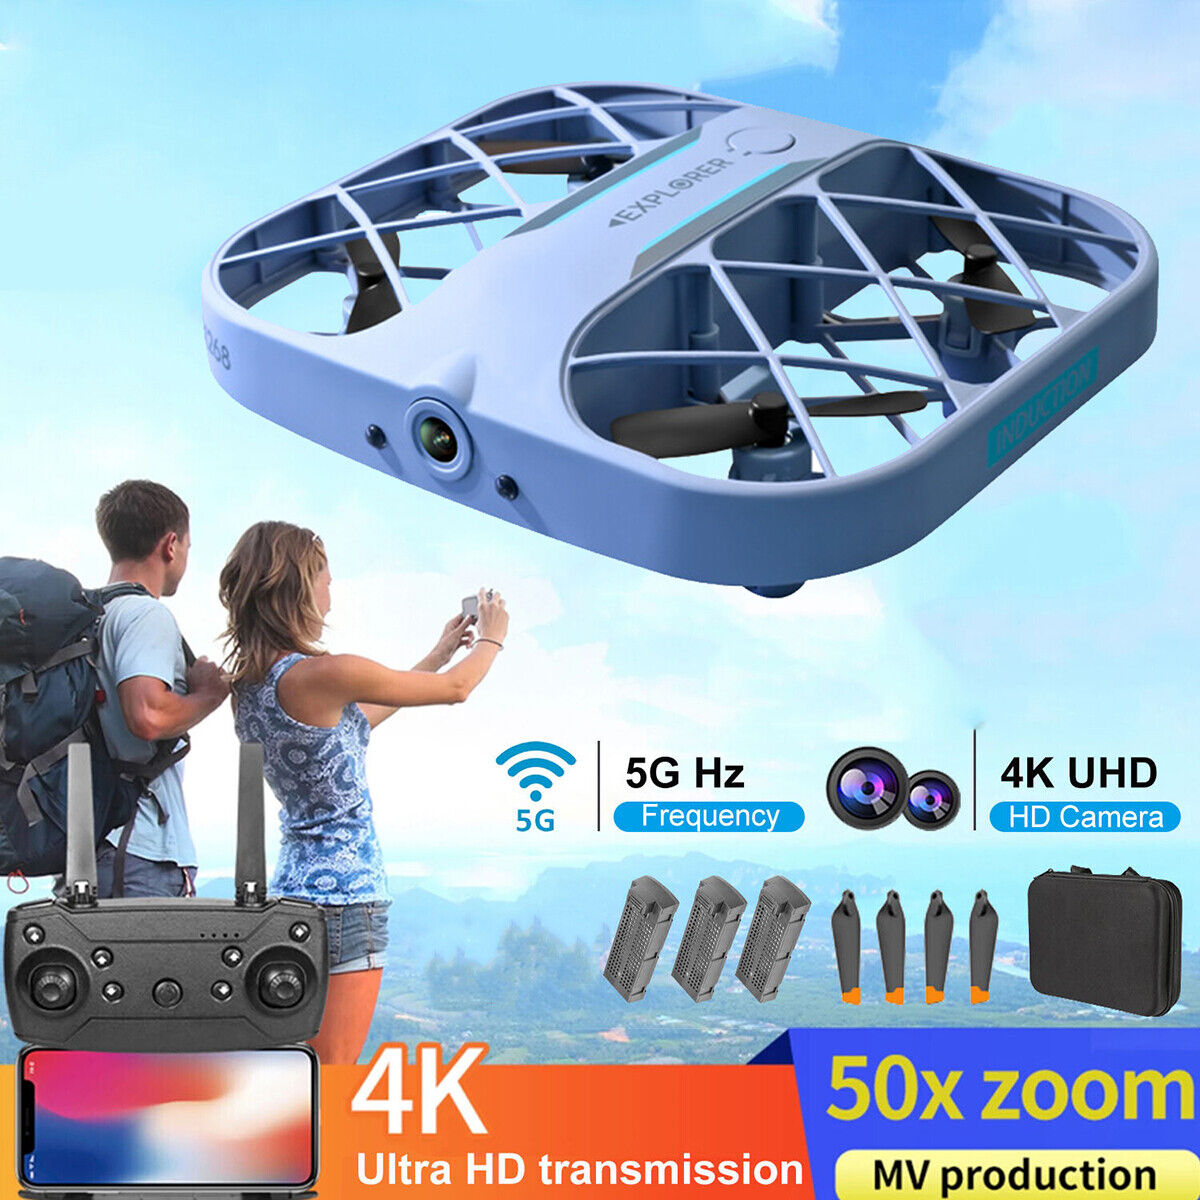 Foldable RC Drone with 4K Camera and GPS